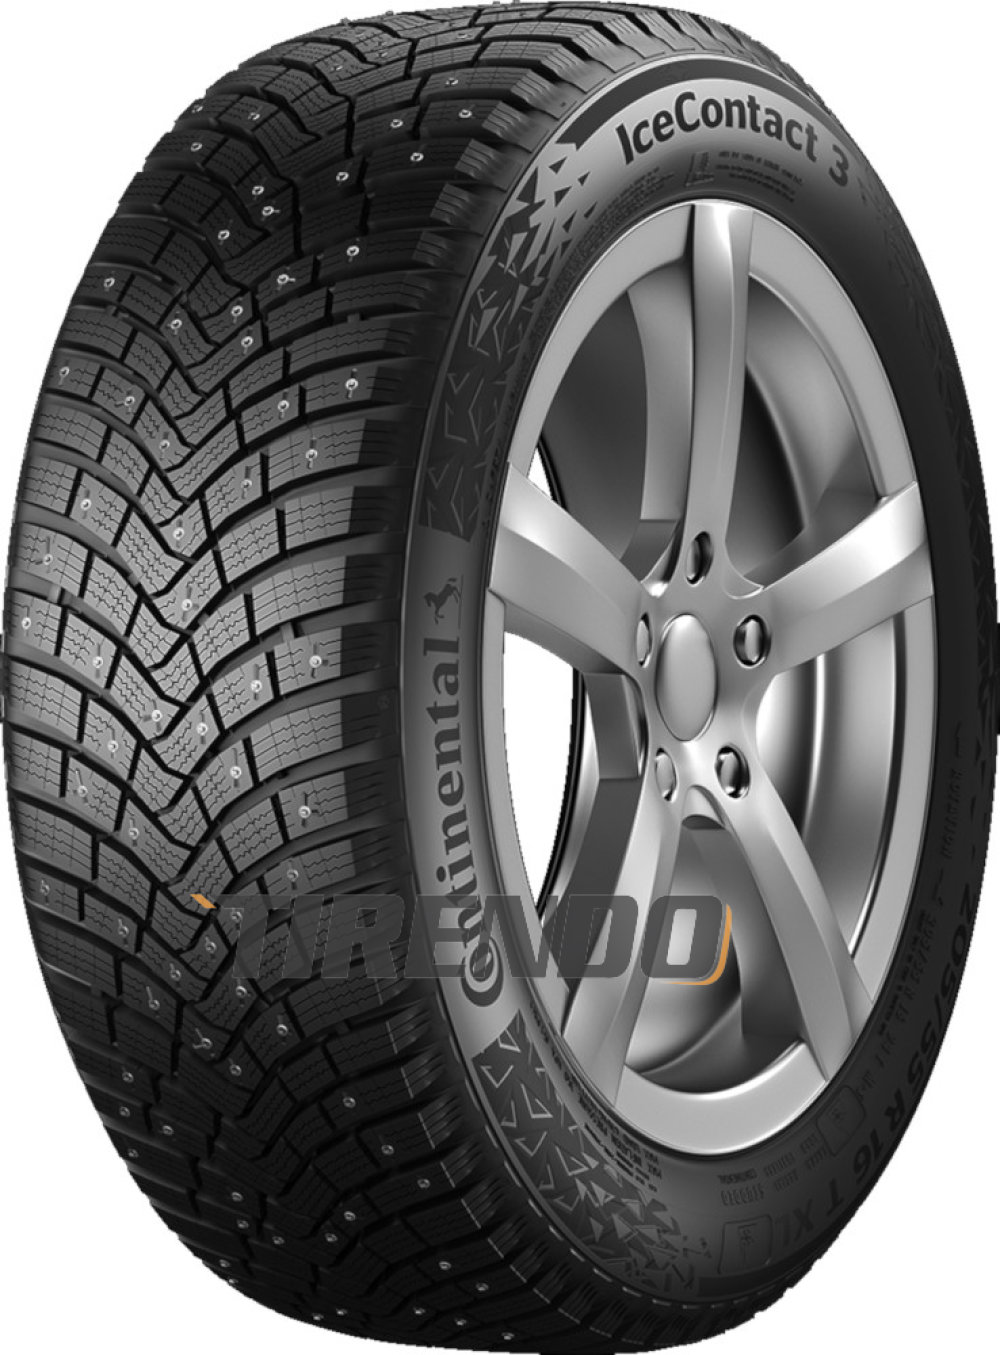 Continental IceContact 3 ( 185/65 R15 92T XL, bespiked ) von Continental